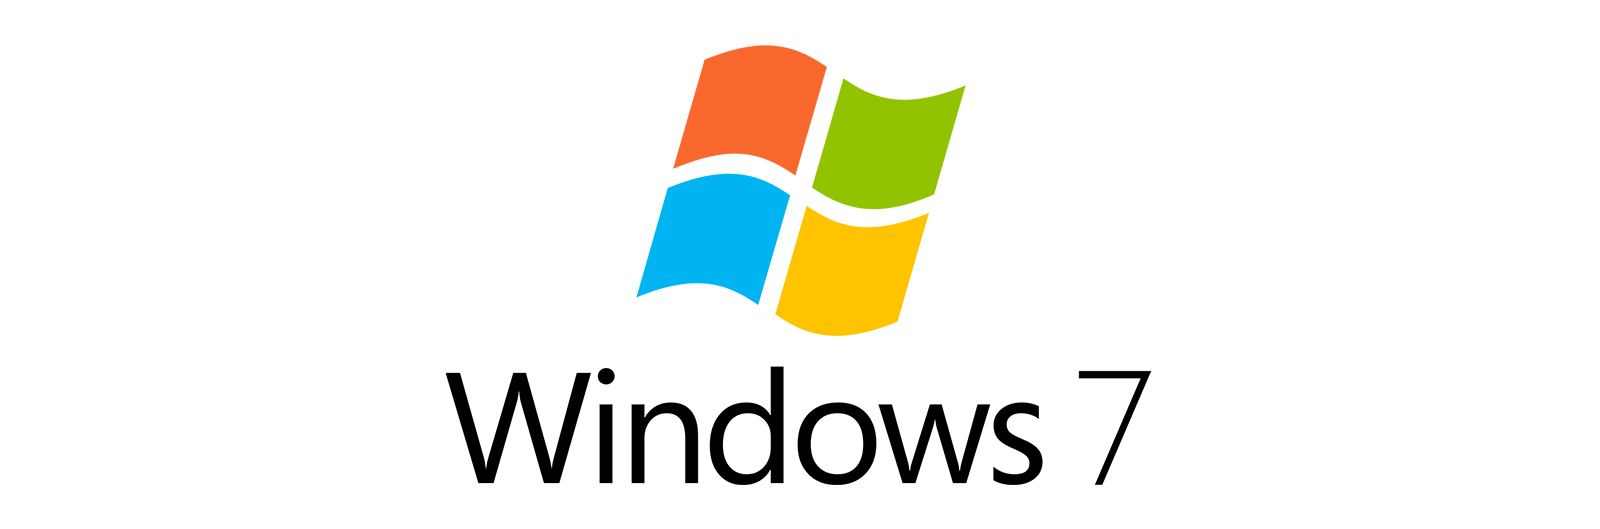 Microsoft cans Windows 7 support